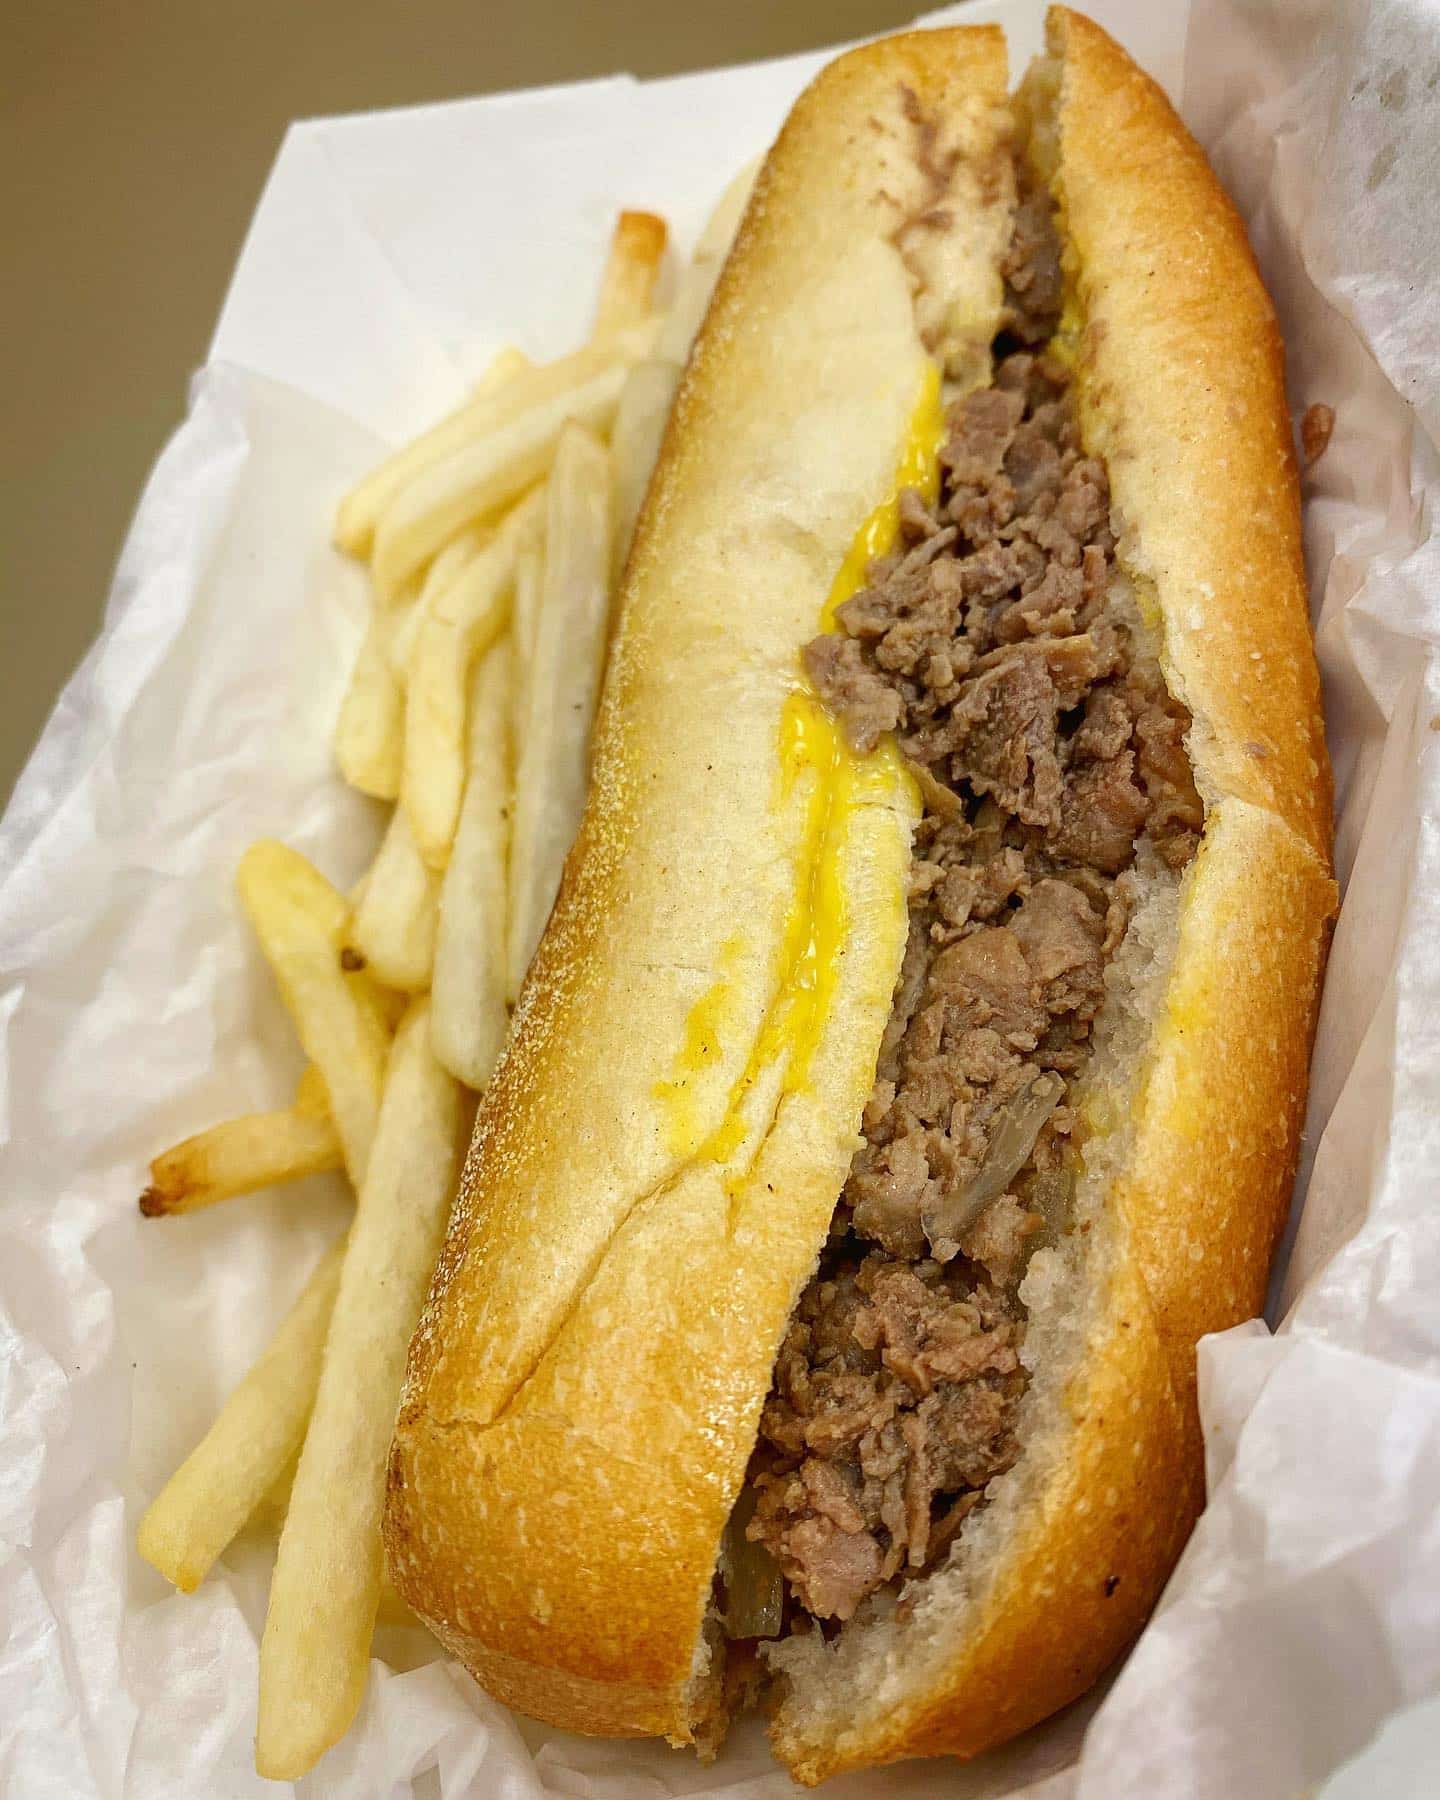 Philly Cheesesteak with Wiz and fries